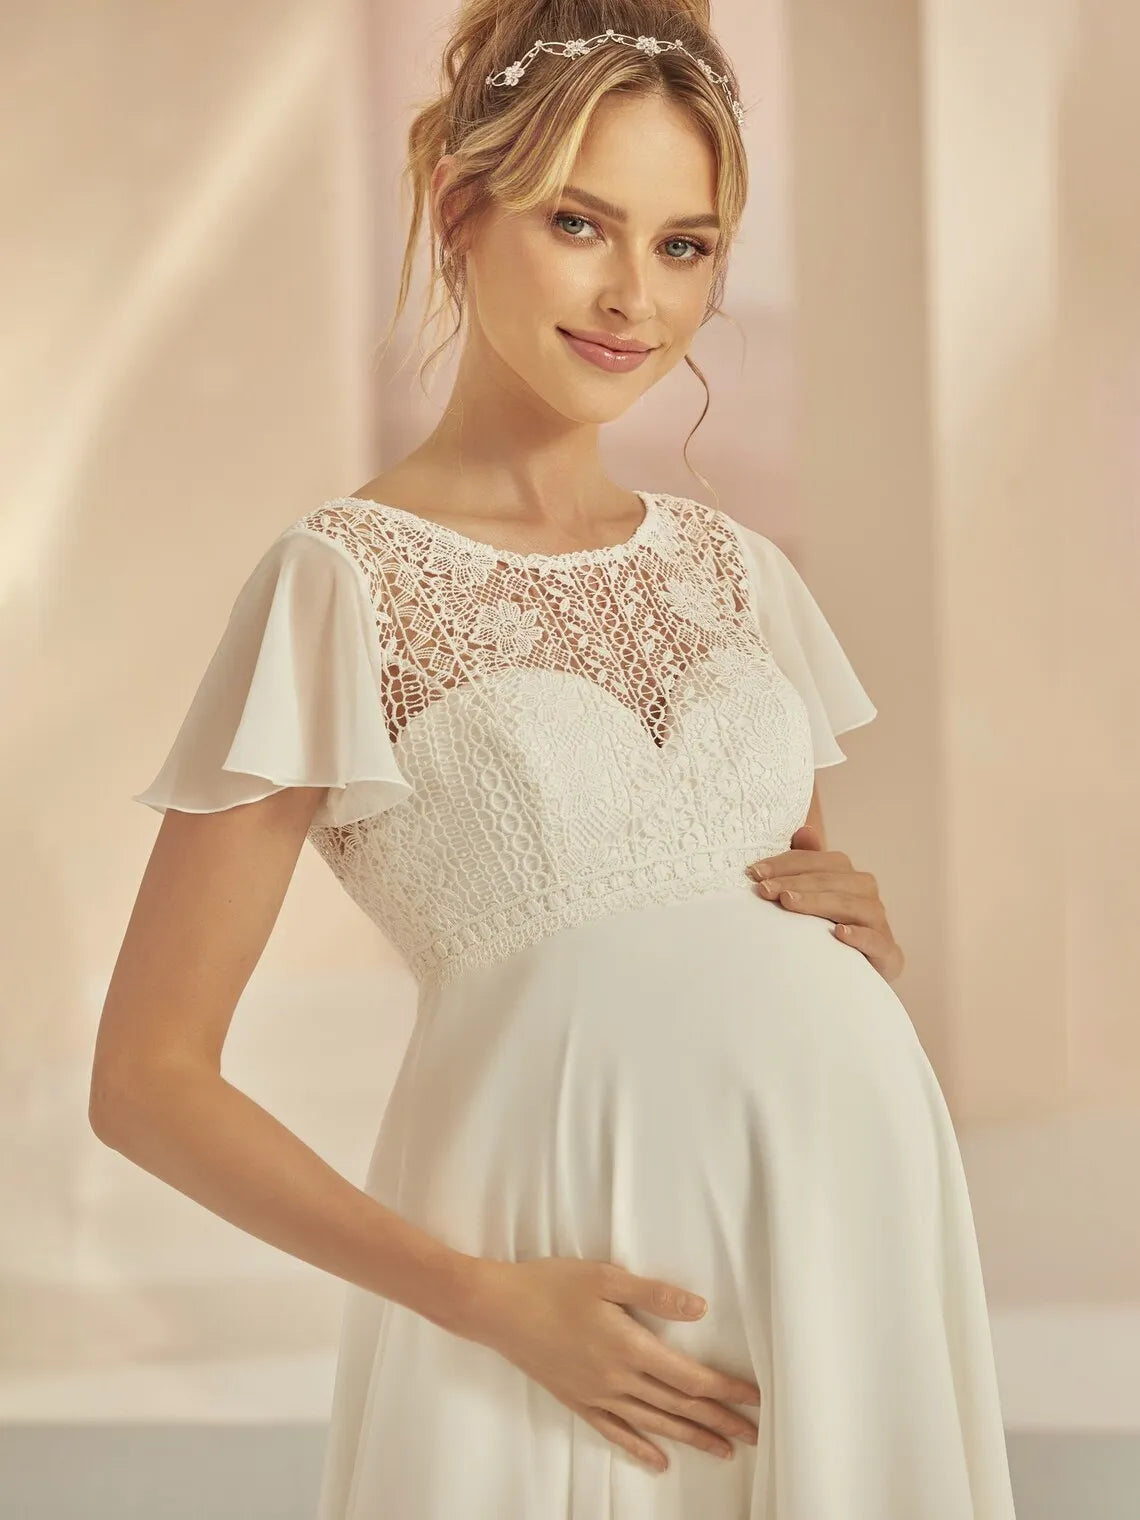 Pregnant Wedding Dress Engagement Bride Gown Lace Chiffon Short Sleeves Corset Back Long Floor Length Sweep Train Bridal Gown